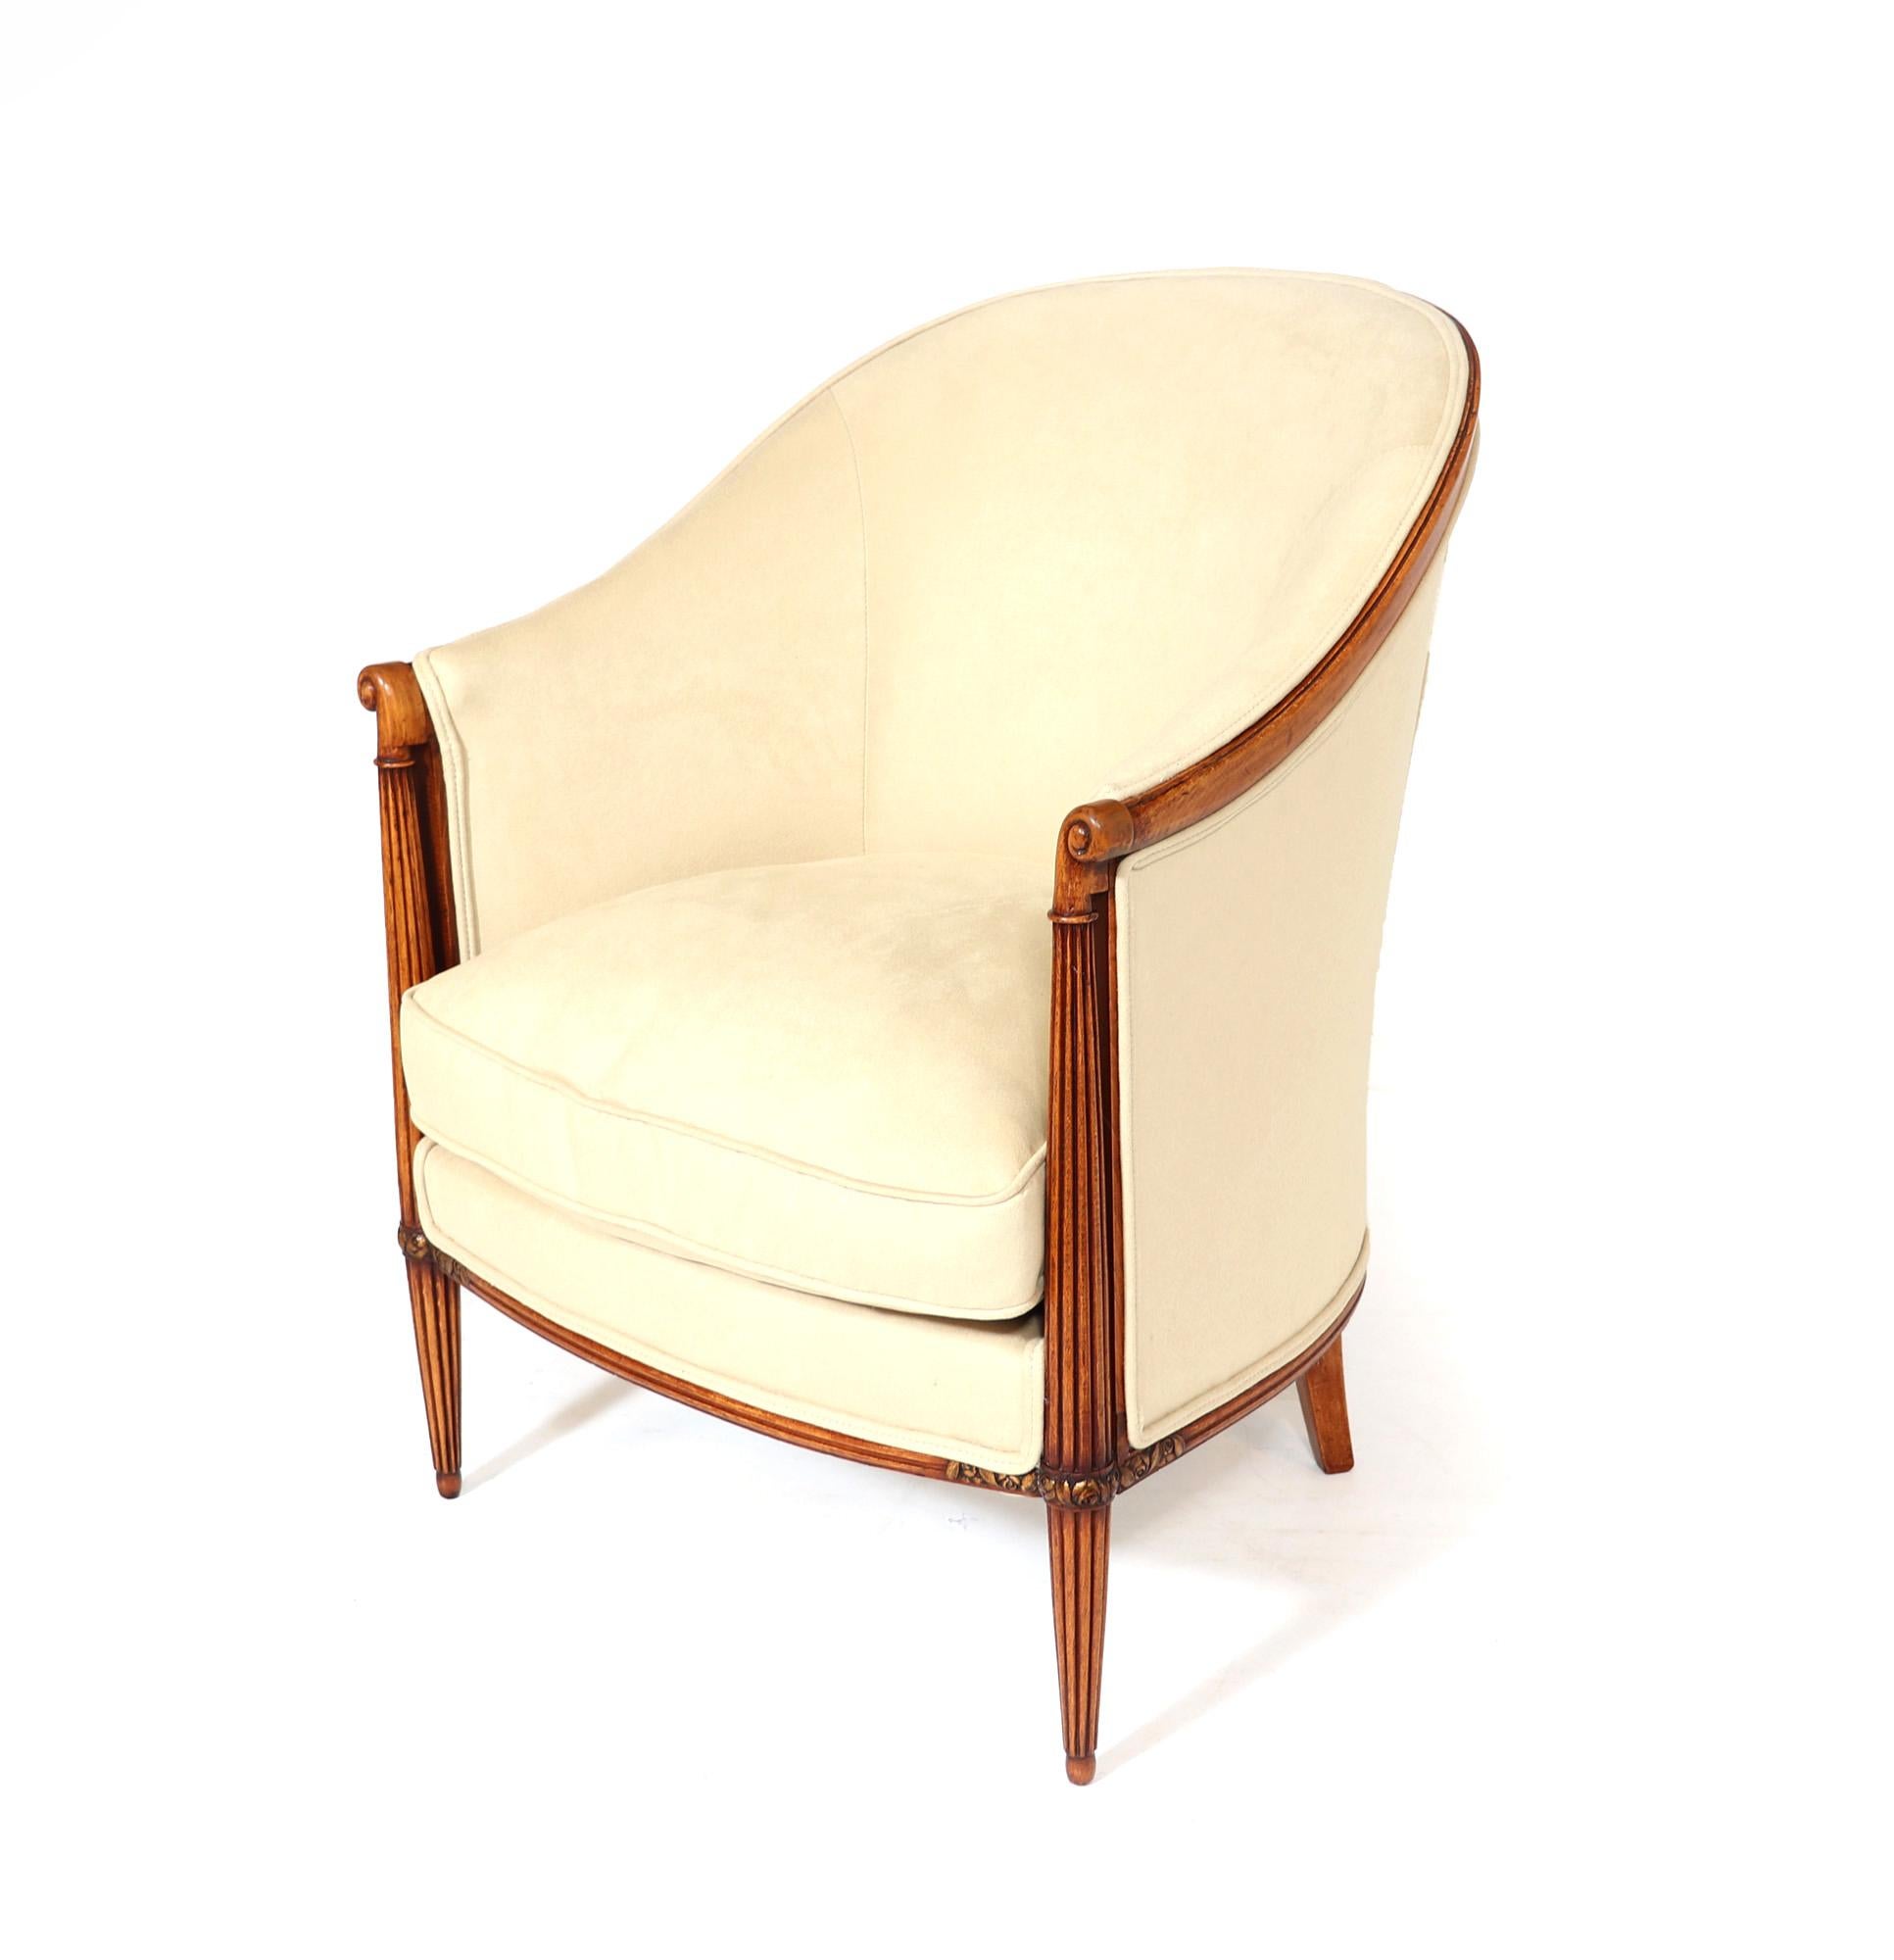 A fine quality pair of French art Deco bergeres with turned reeded leg with shaped top and gilded carving polished show wood and fully upholstered, coil sprung with down filled cushion and covered in soft cream velvety suede type fabric that is